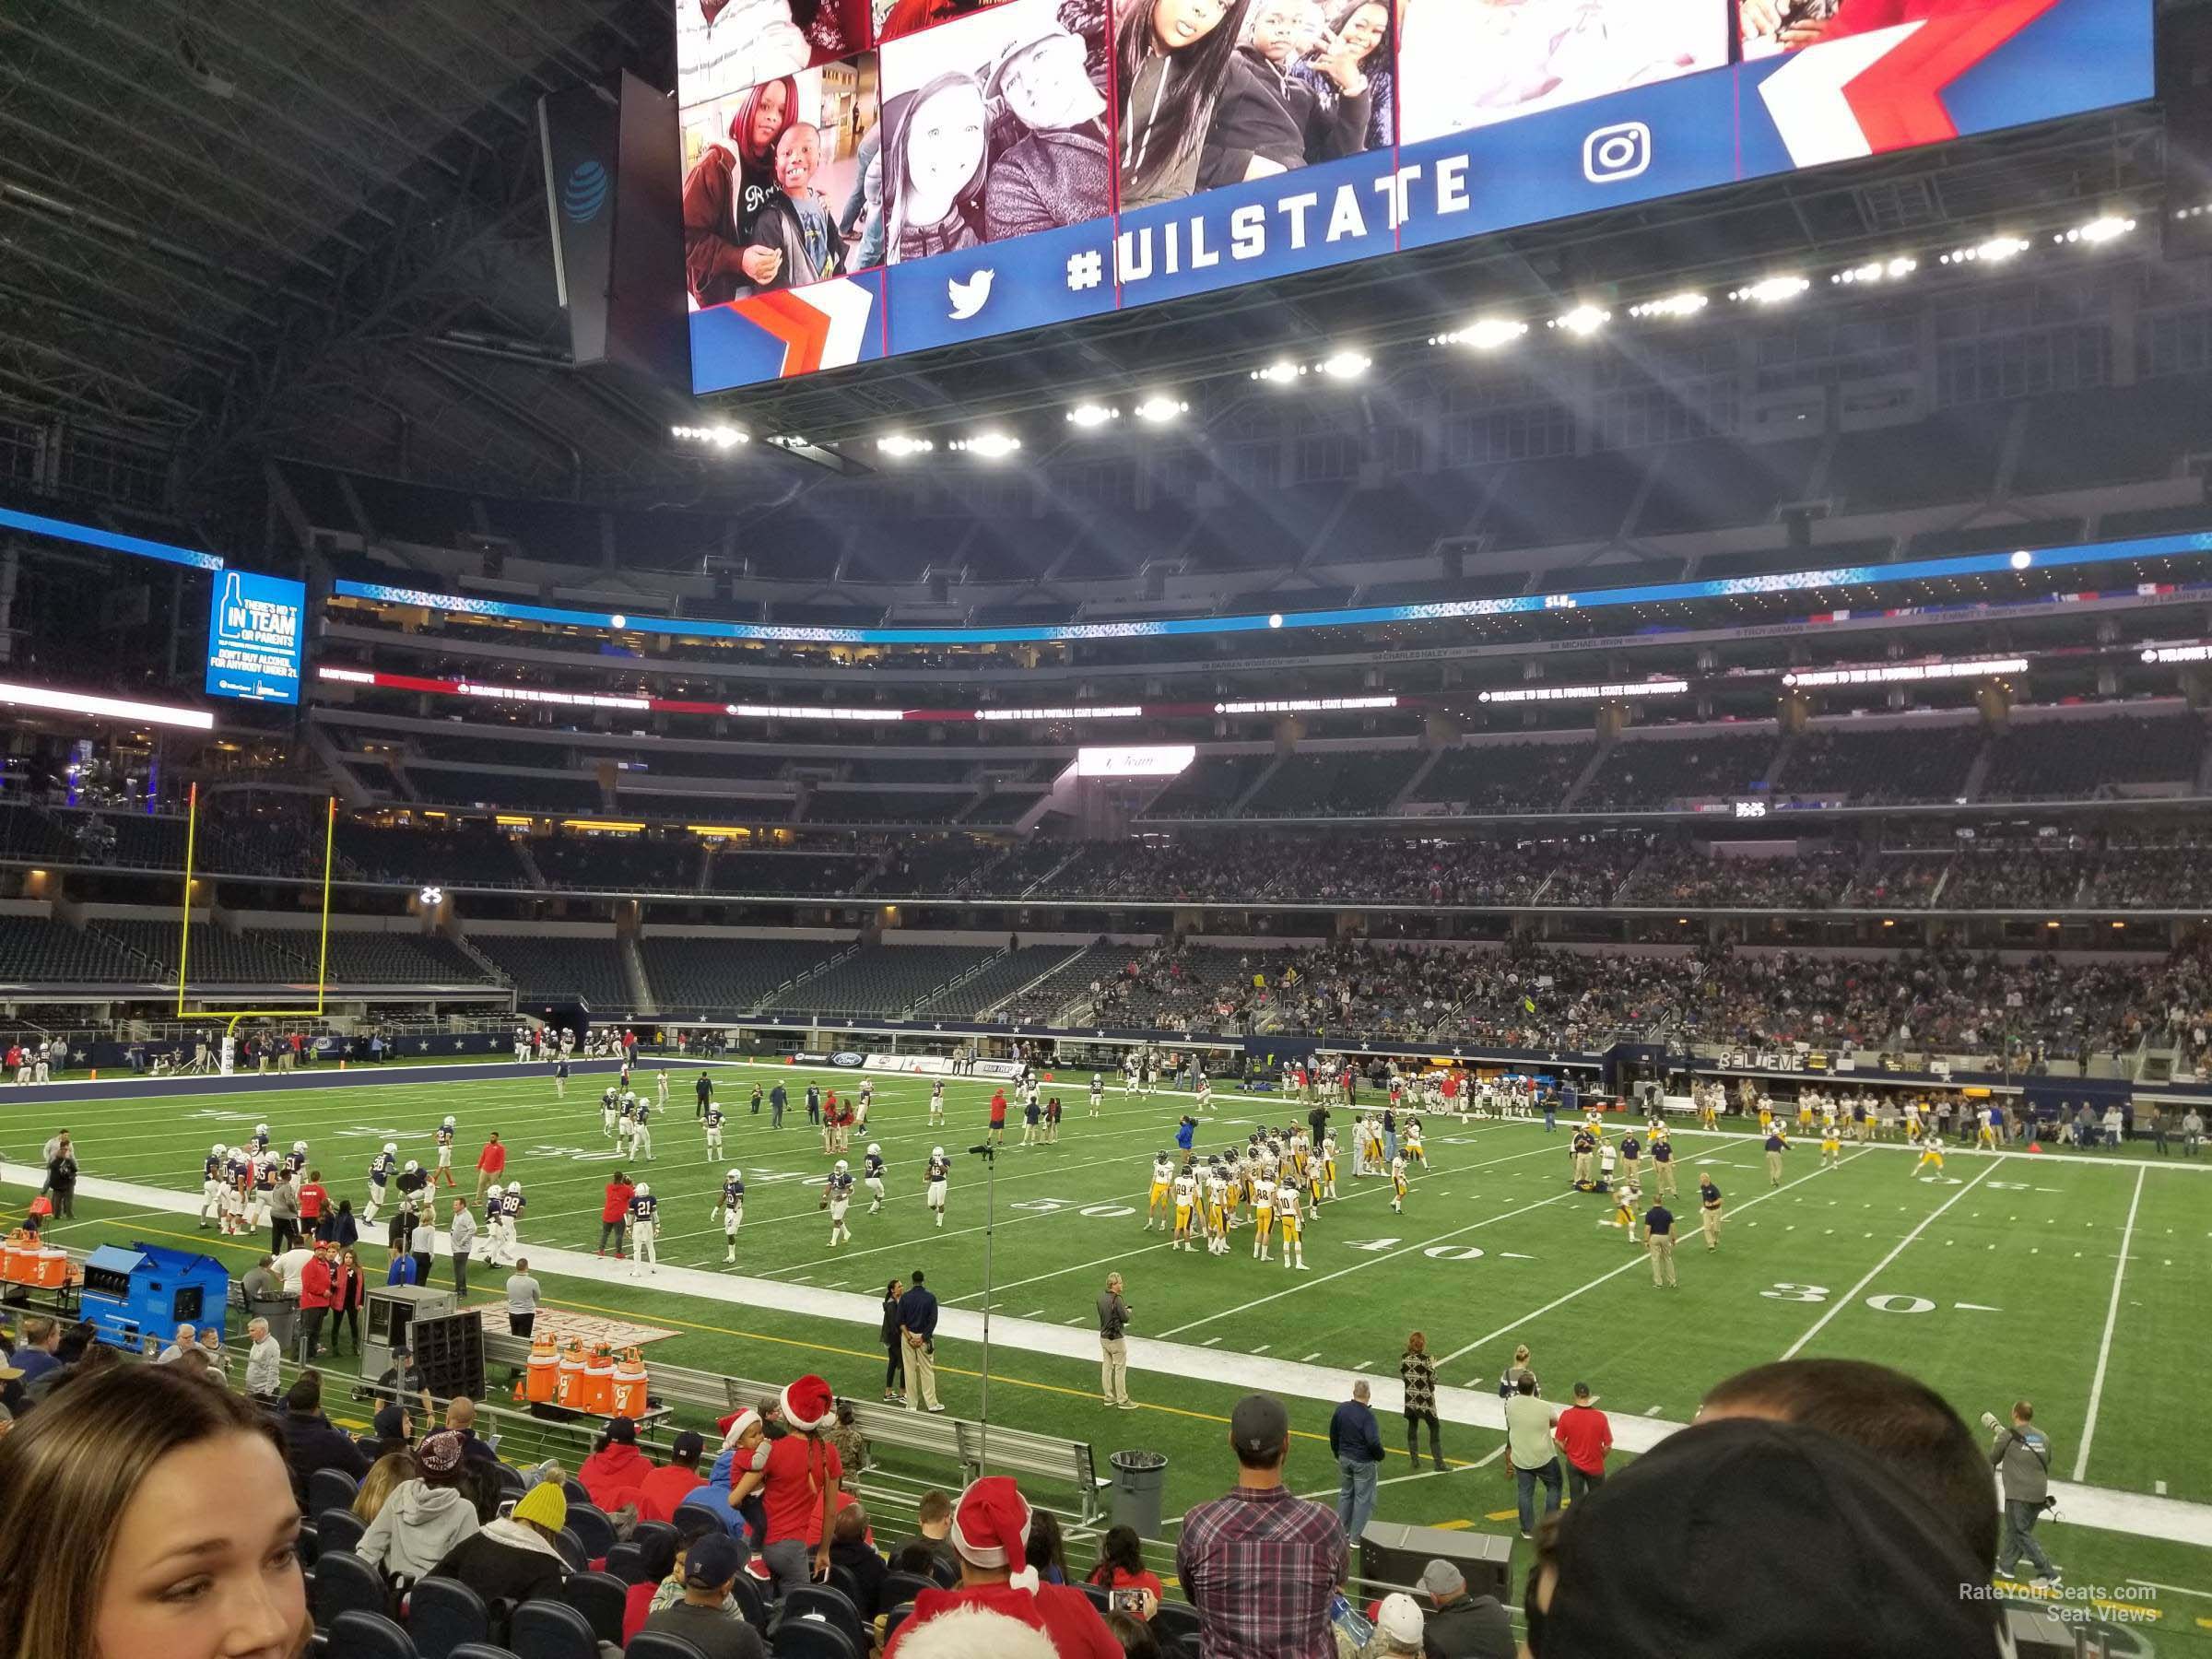 section c108, row 12 seat view  for football - at&t stadium (cowboys stadium)